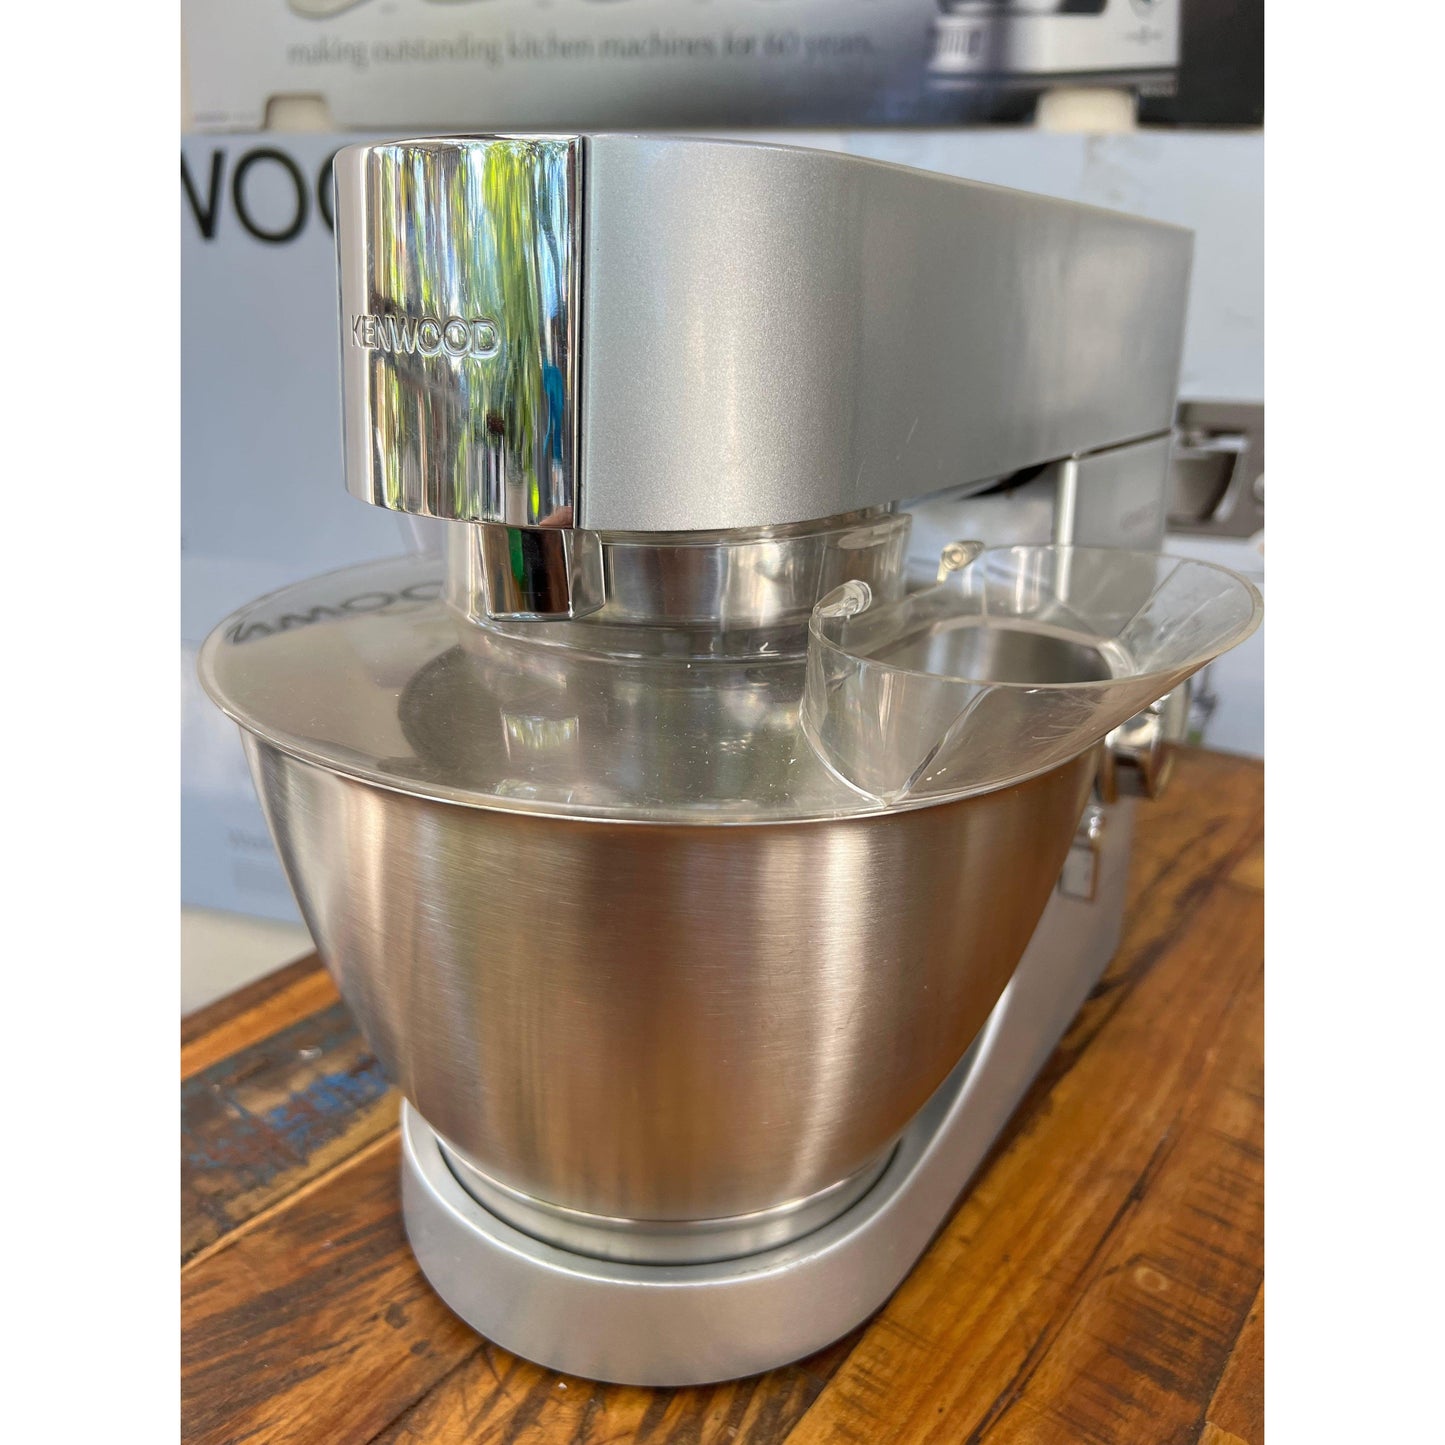 Kenwood Chef Titanium stand Mixer - Pre Loved